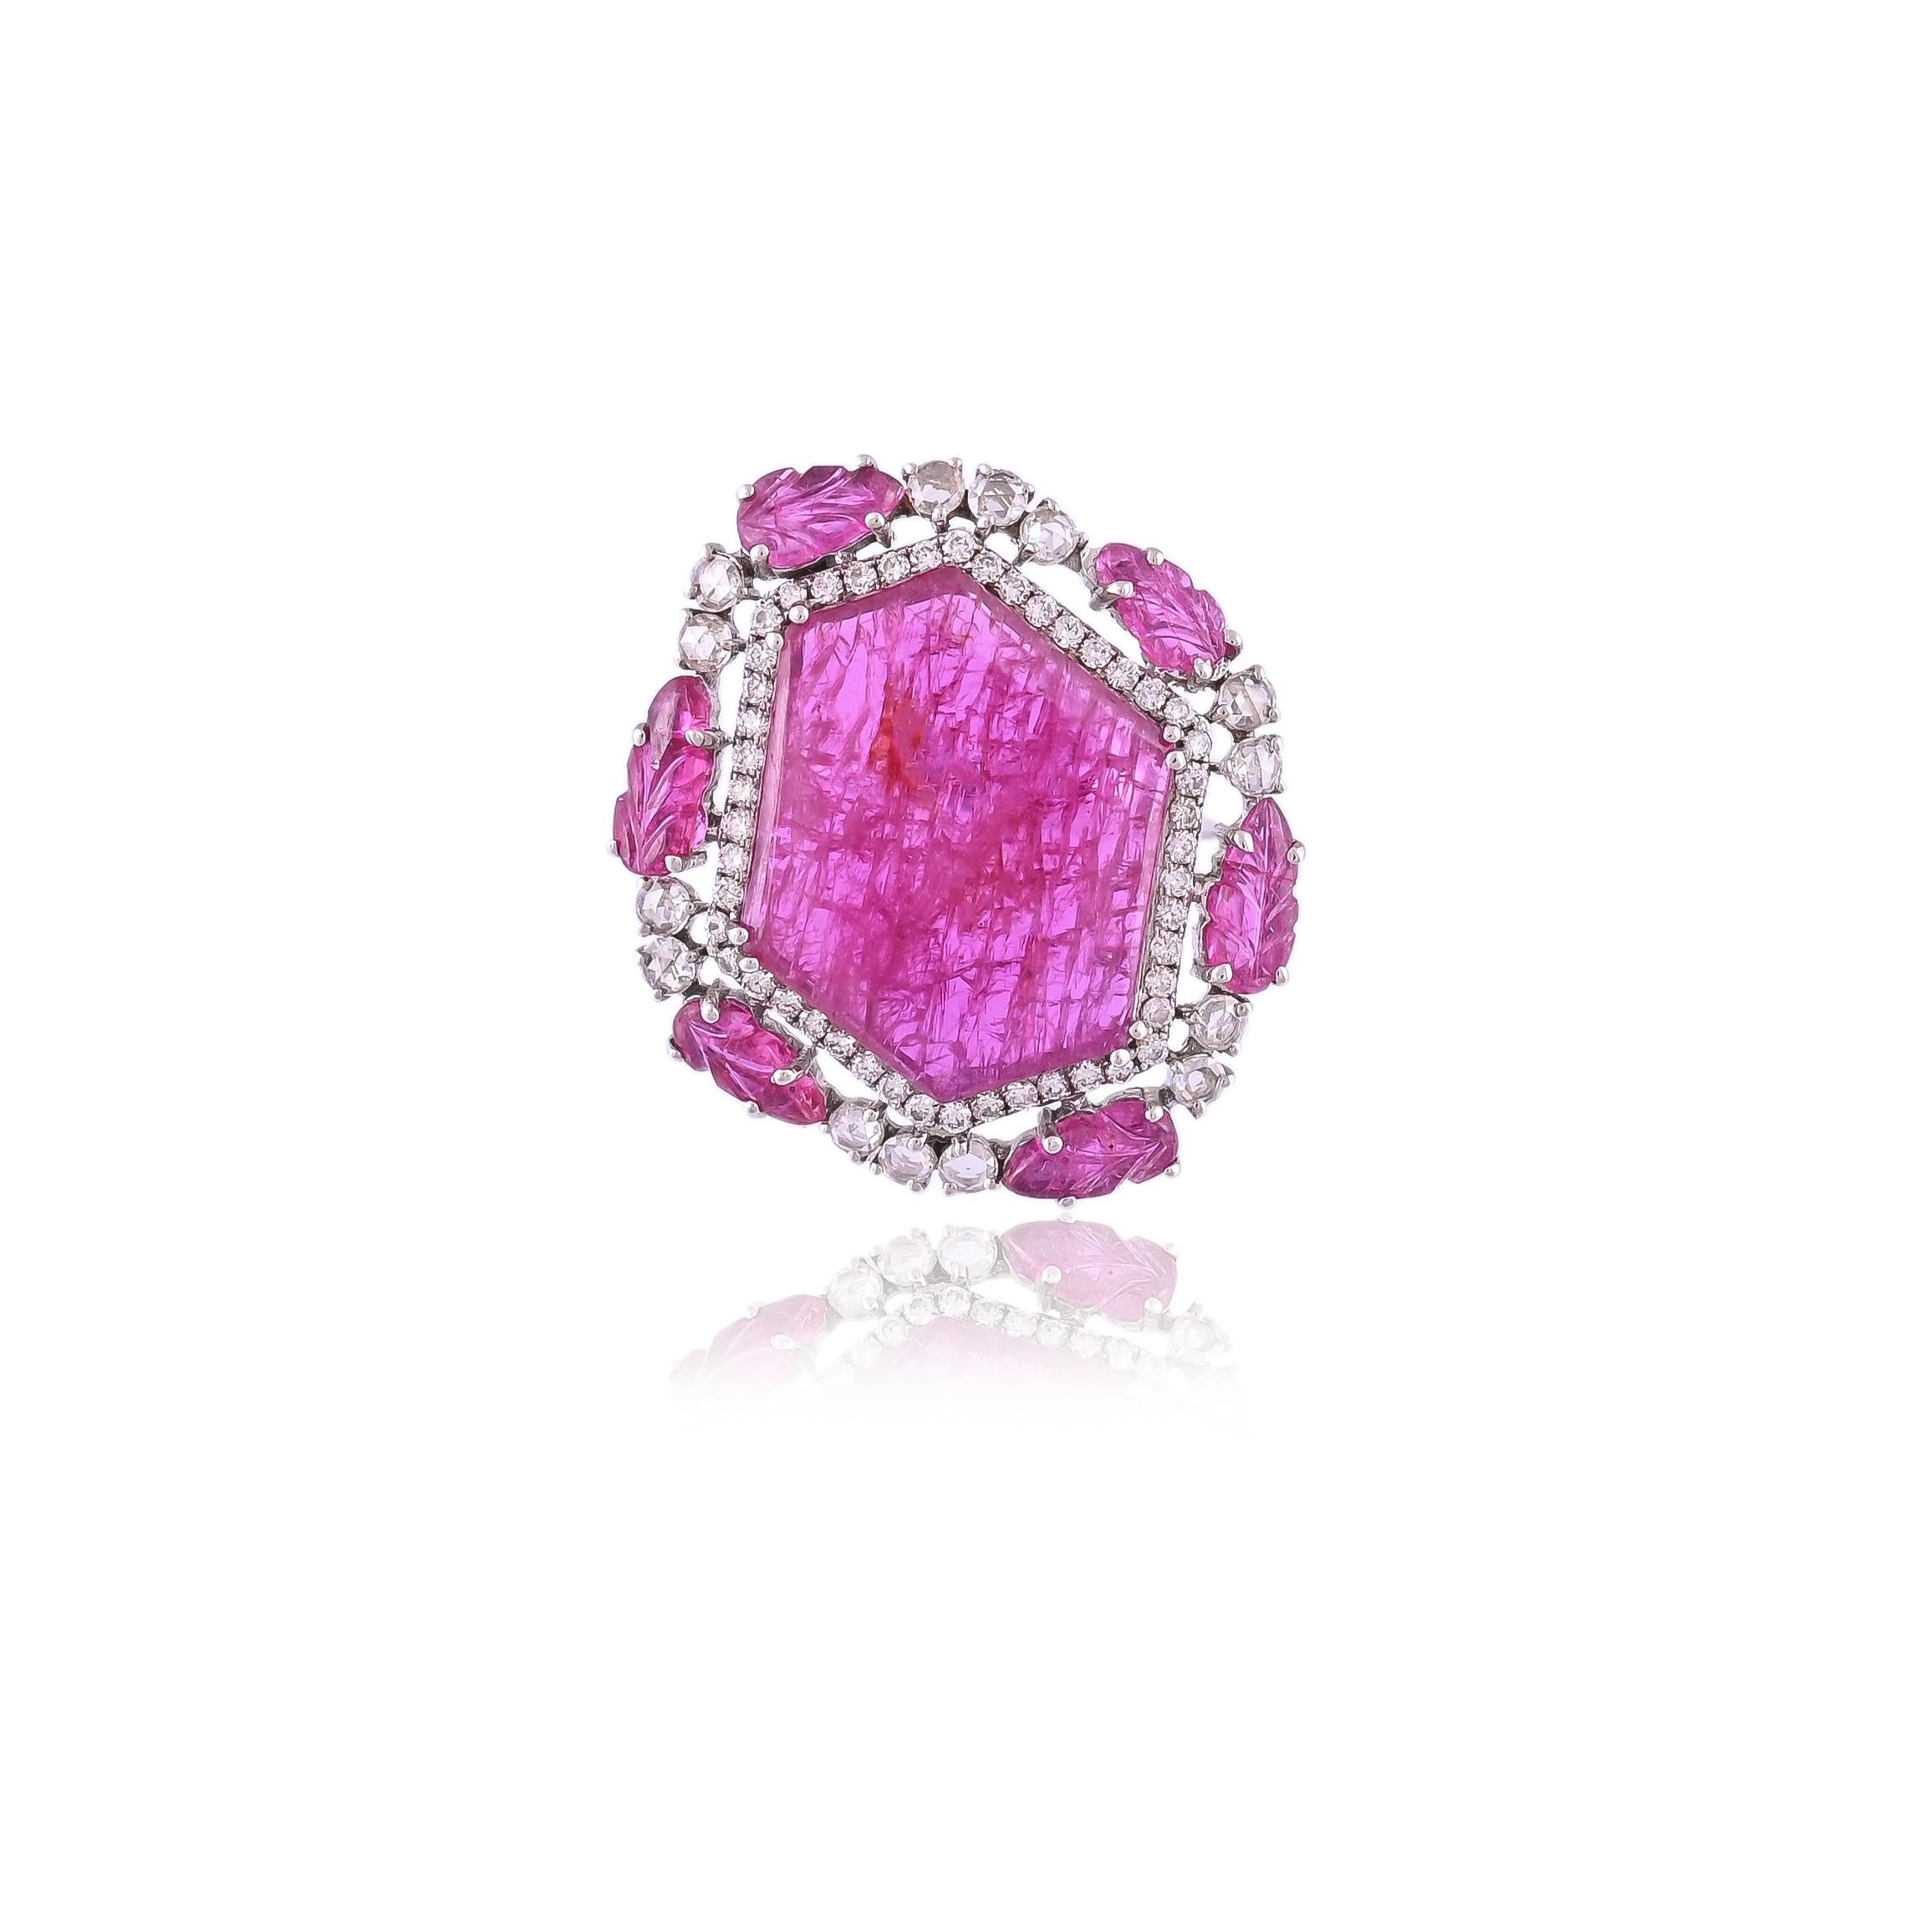 A very beautiful Ruby and Diamonds Cocktail Ring set in 18K Gold & Diamonds. The Ruby is of Mozambique origin and is completely natural. The combined weight of the Ruby is 11.58 carats. The combined diamonds weight is 0.82 carats. The dimensions of